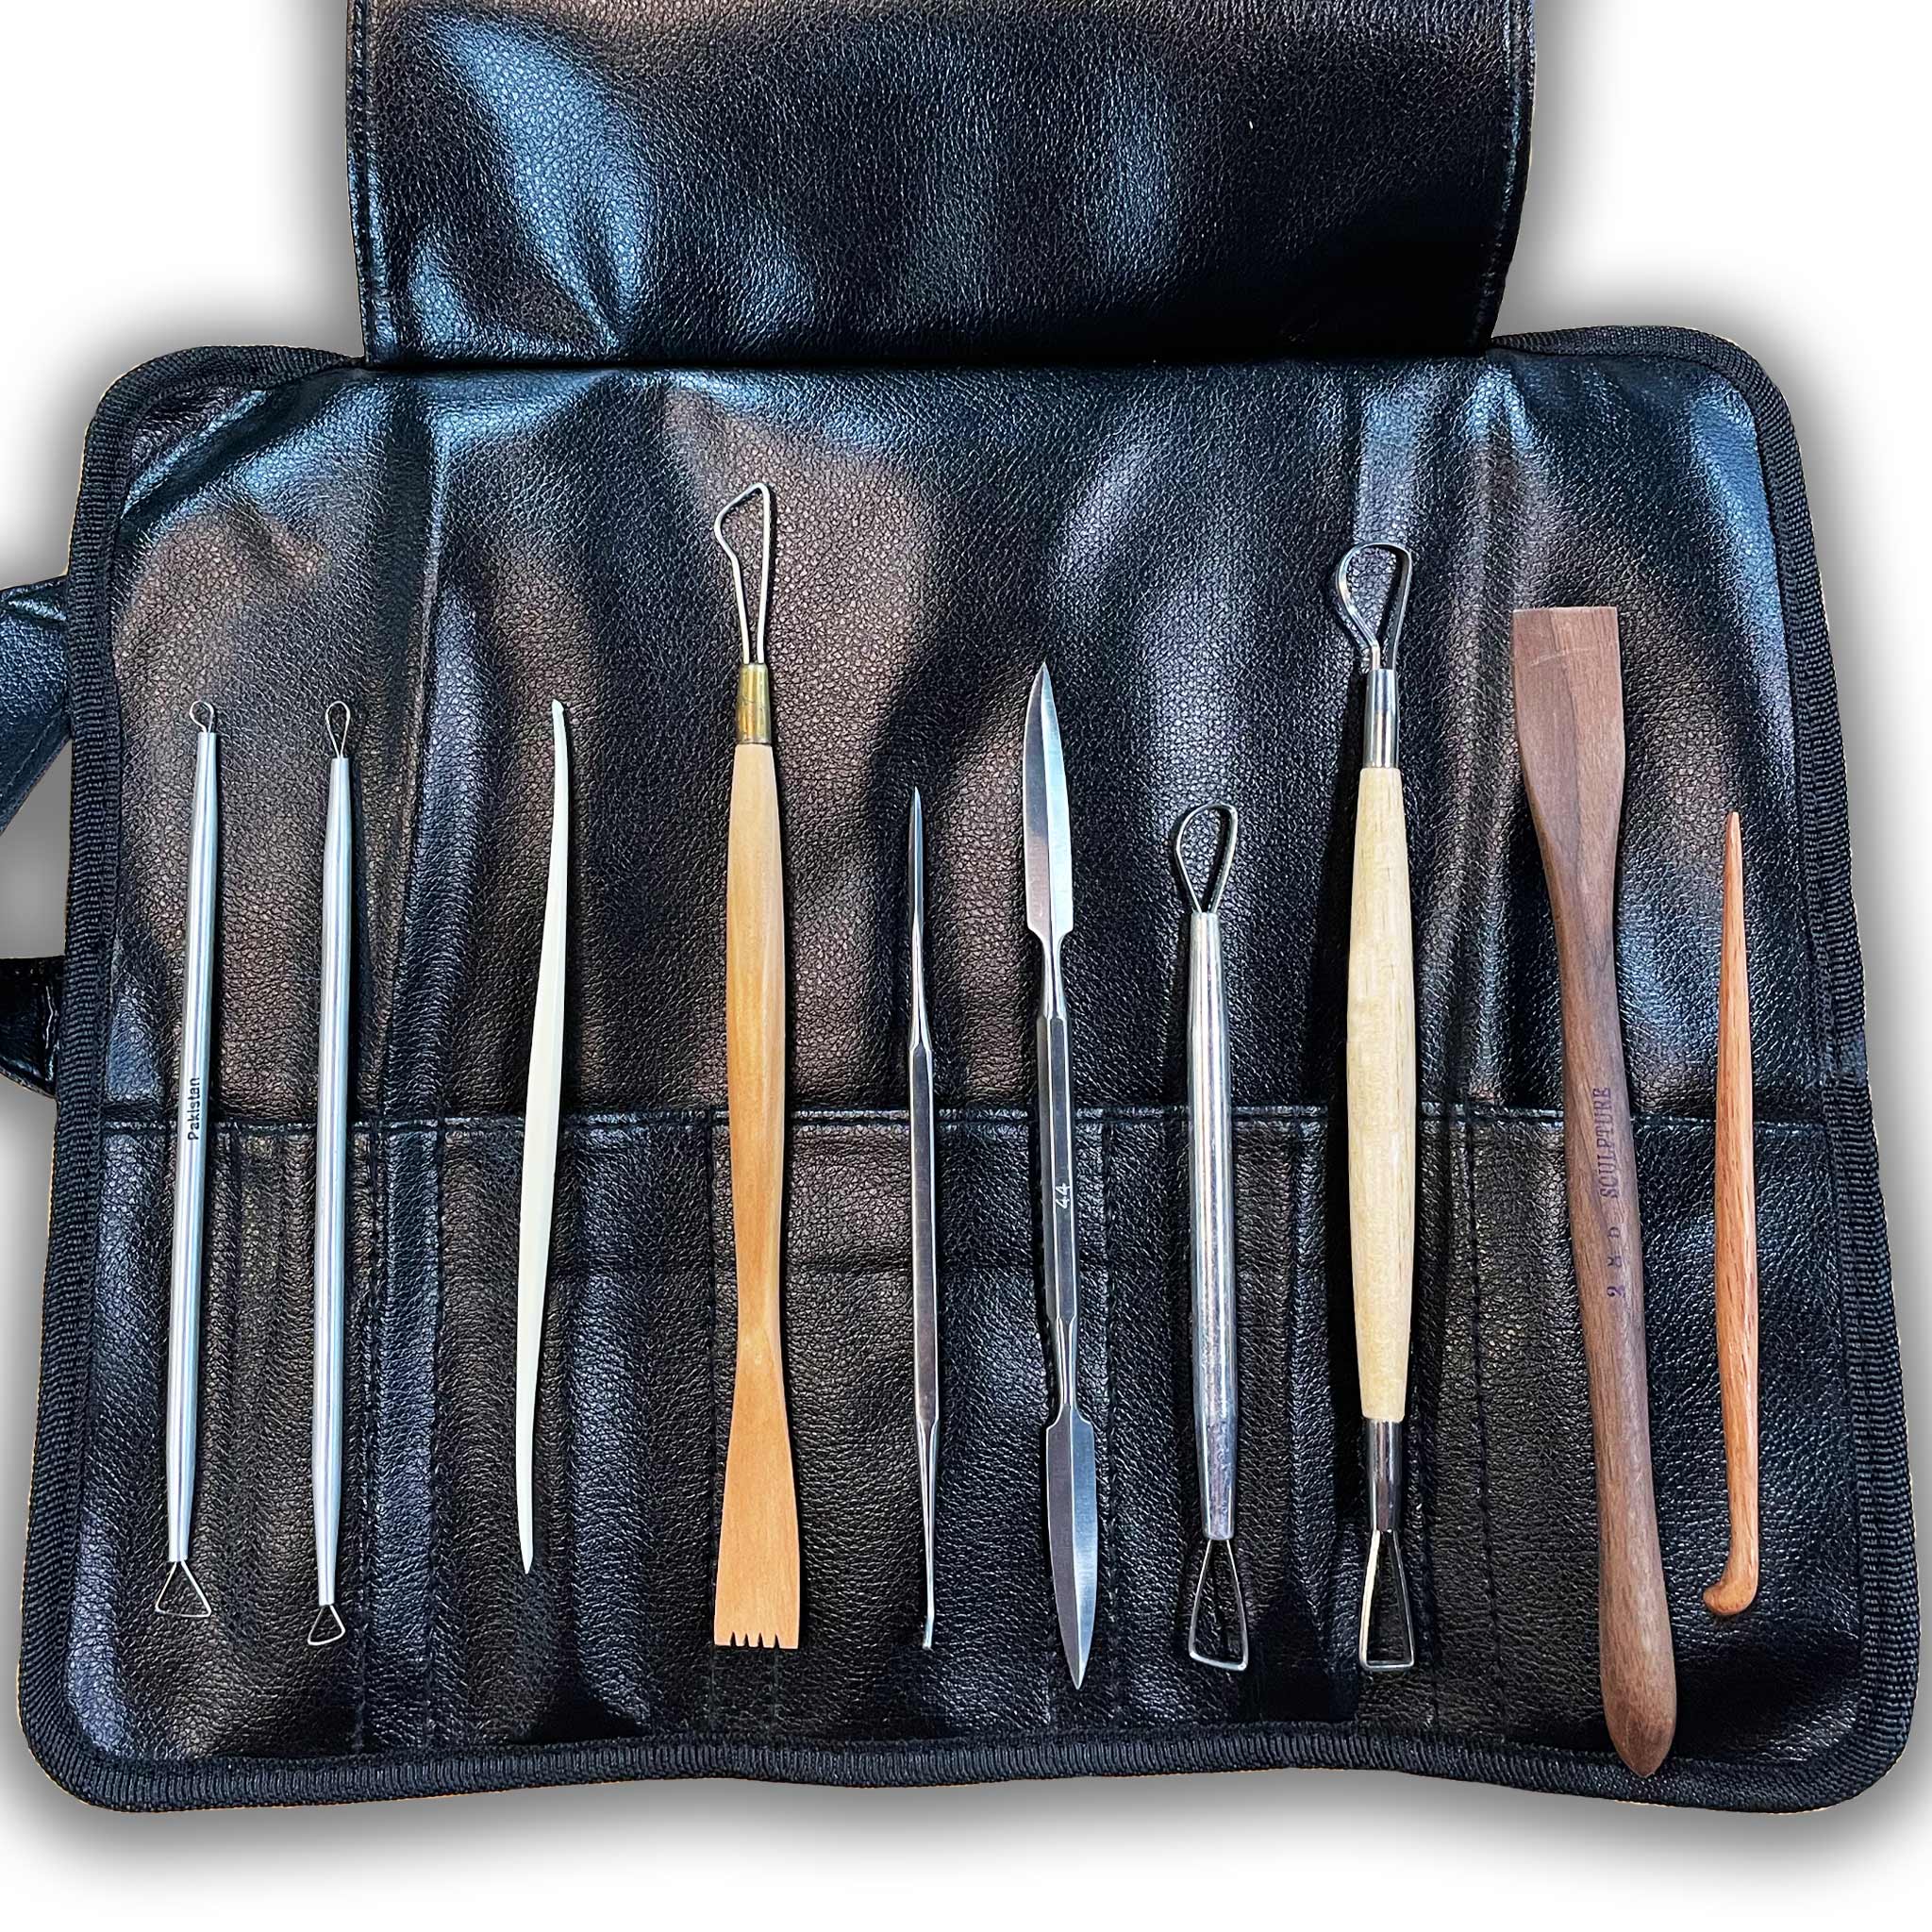 Artists' Choice Clay Modeling Tool Kit 10 piece